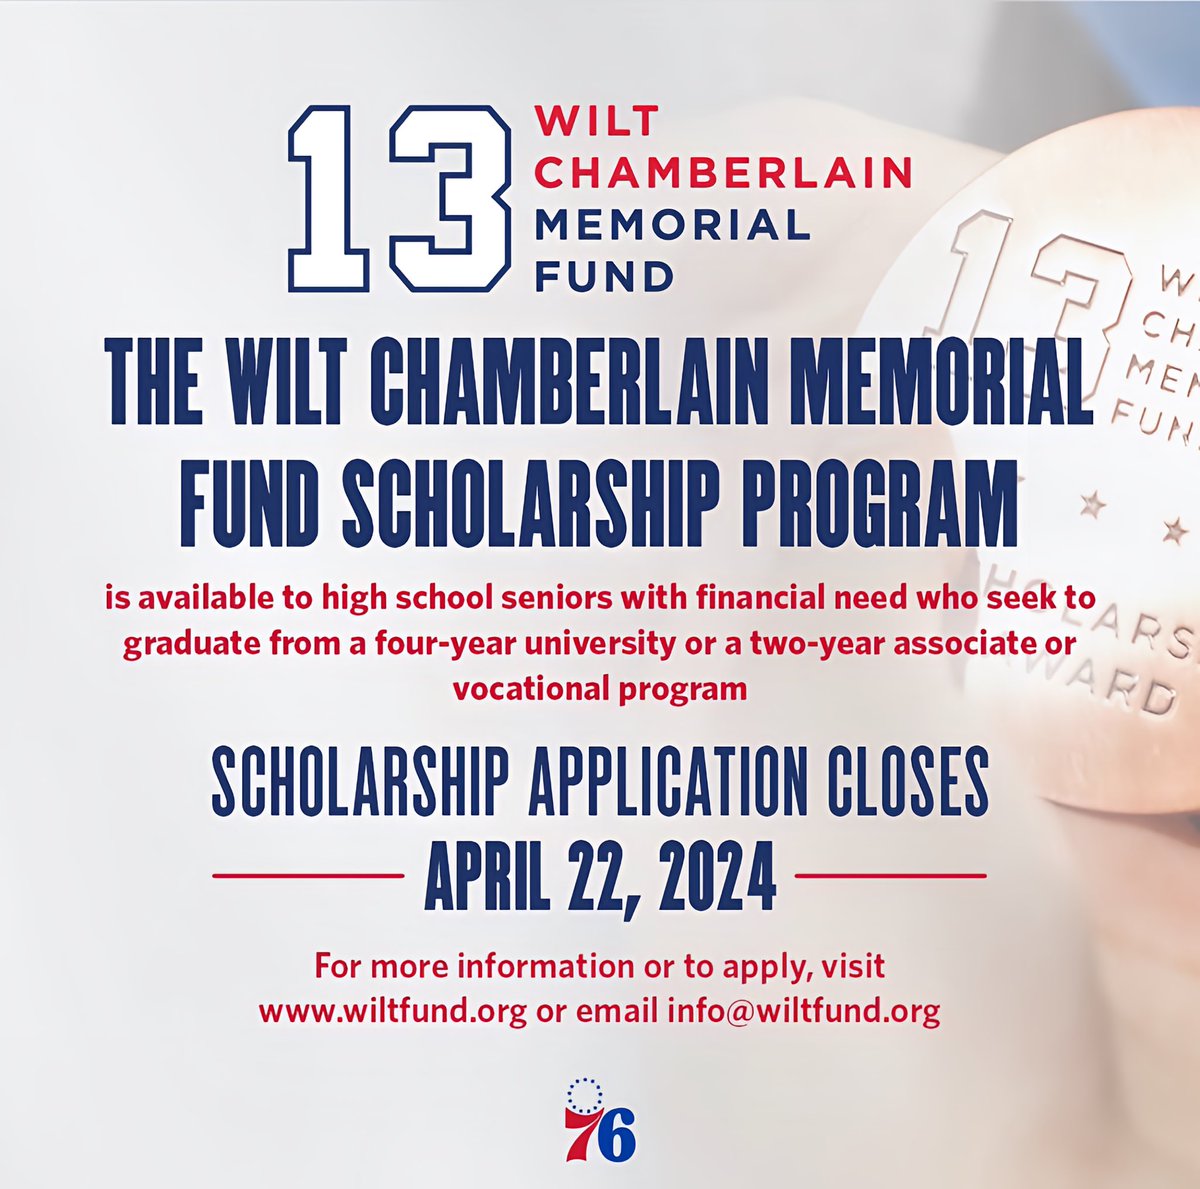 Good things come to those who work!
Beyond the game, Wilt Chamberlain’s legacy lives on in the charitable spirit he stood for, the scholarships he made possible, and in you. 

For more details and to apply visit: wiltfund.org

#scholarship #school #college #education